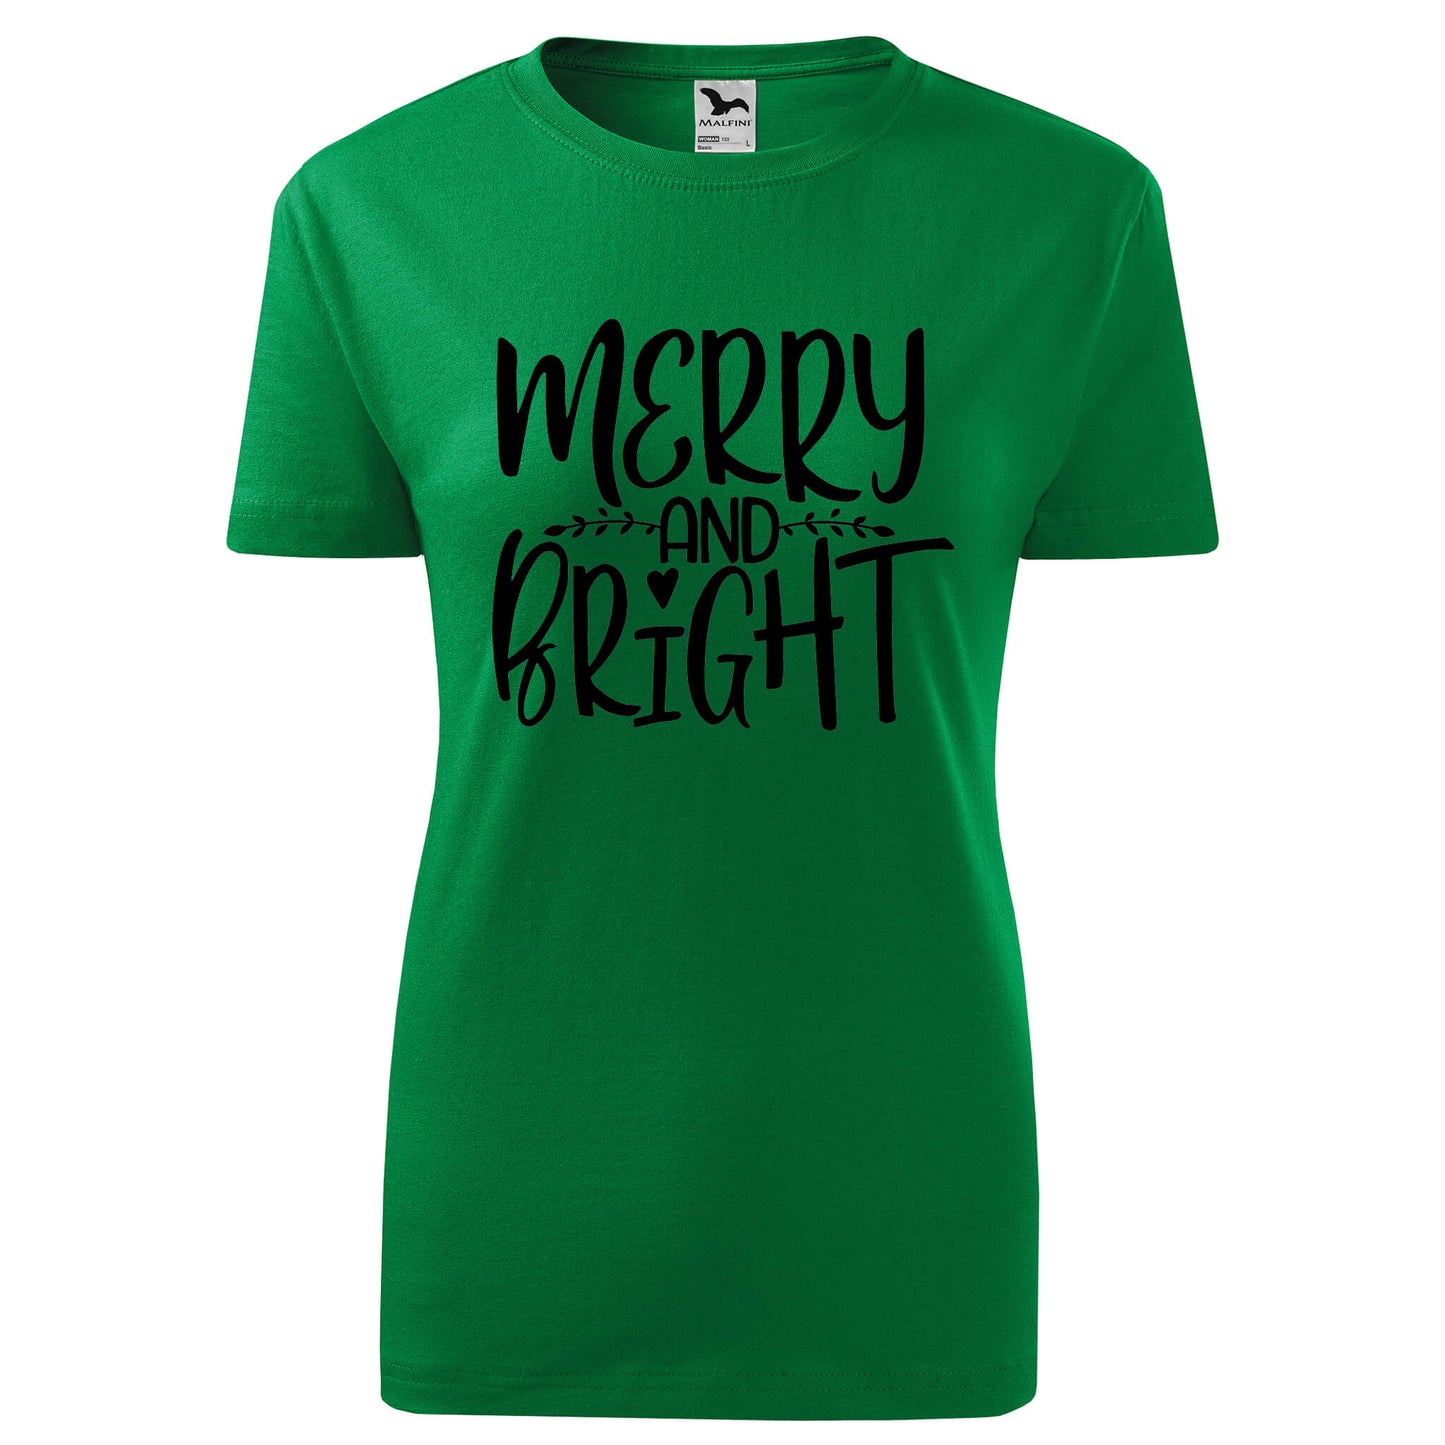 Merry and bright t-shirt - rvdesignprint